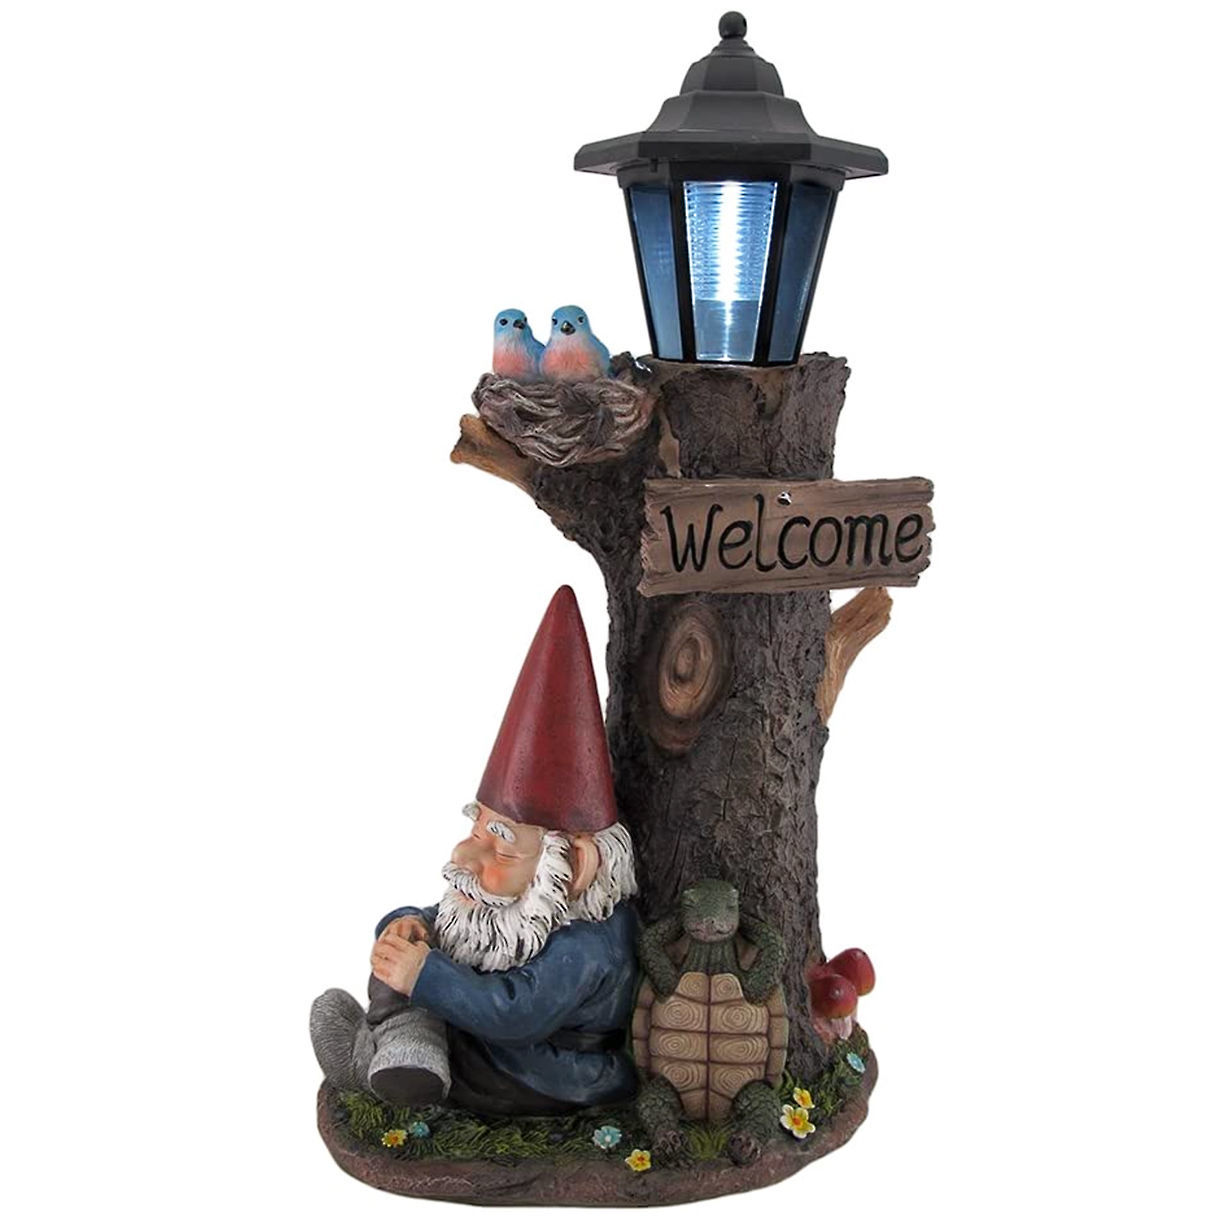 Gnome Nap Station Welcome Sign with Solar Lantern on tree, with turtle and bluebirds near sleepy gnome, outdoor garden decor